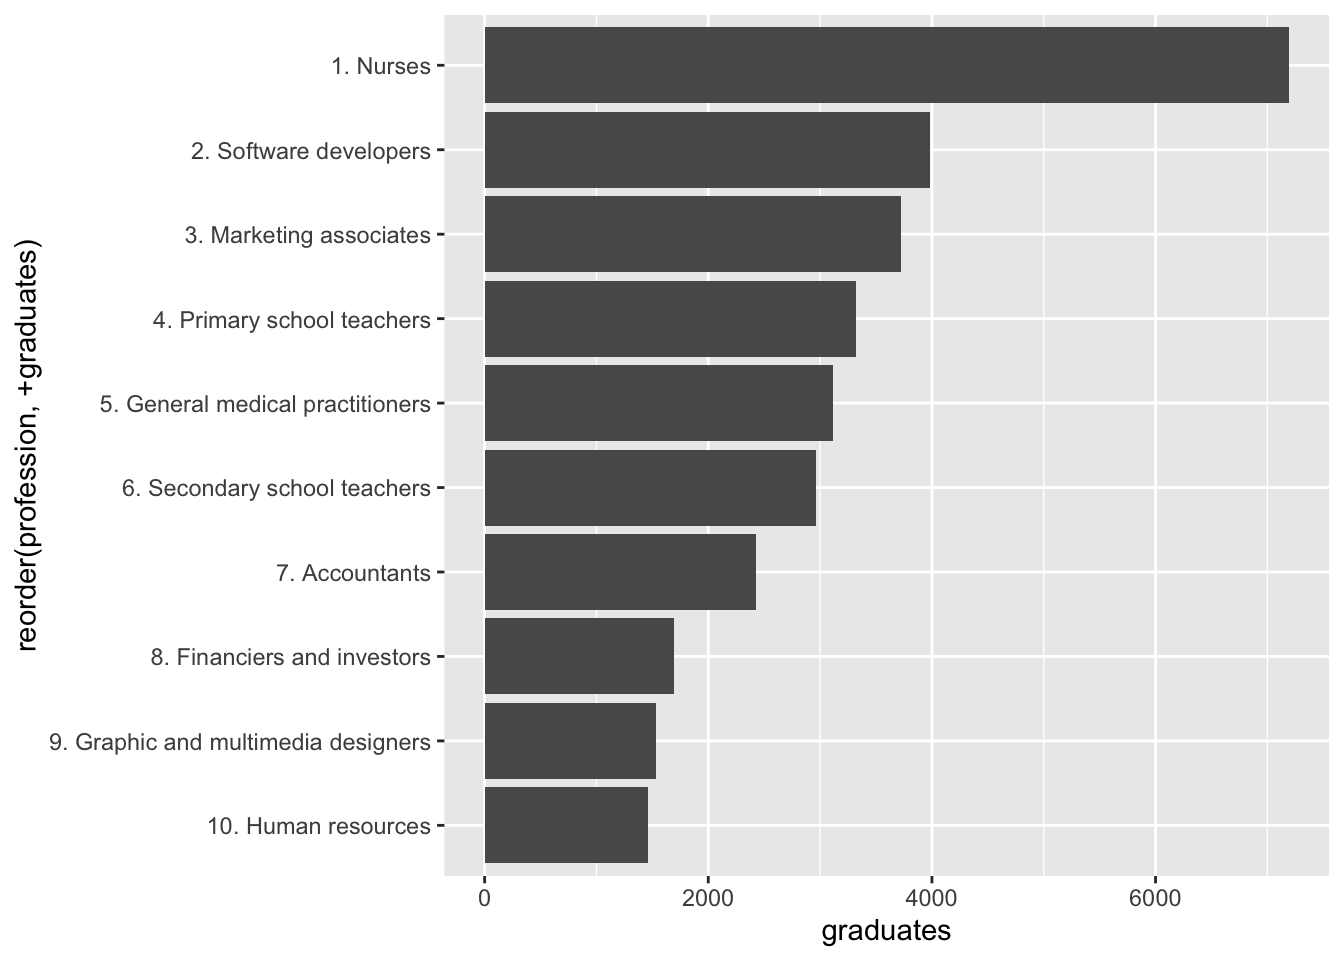 The top ten professions in the UK based on numbers of graduates starting work in 2020, shown on the x axis. In 2020, 3980 graduates started jobs in the UK as programmers and software development professionals, with many vacancies unfilled. So, demand for software developers is high, comparable to teachers, nurses and medical professionals, according to data published by prospects.ac.uk (Ball 2023)